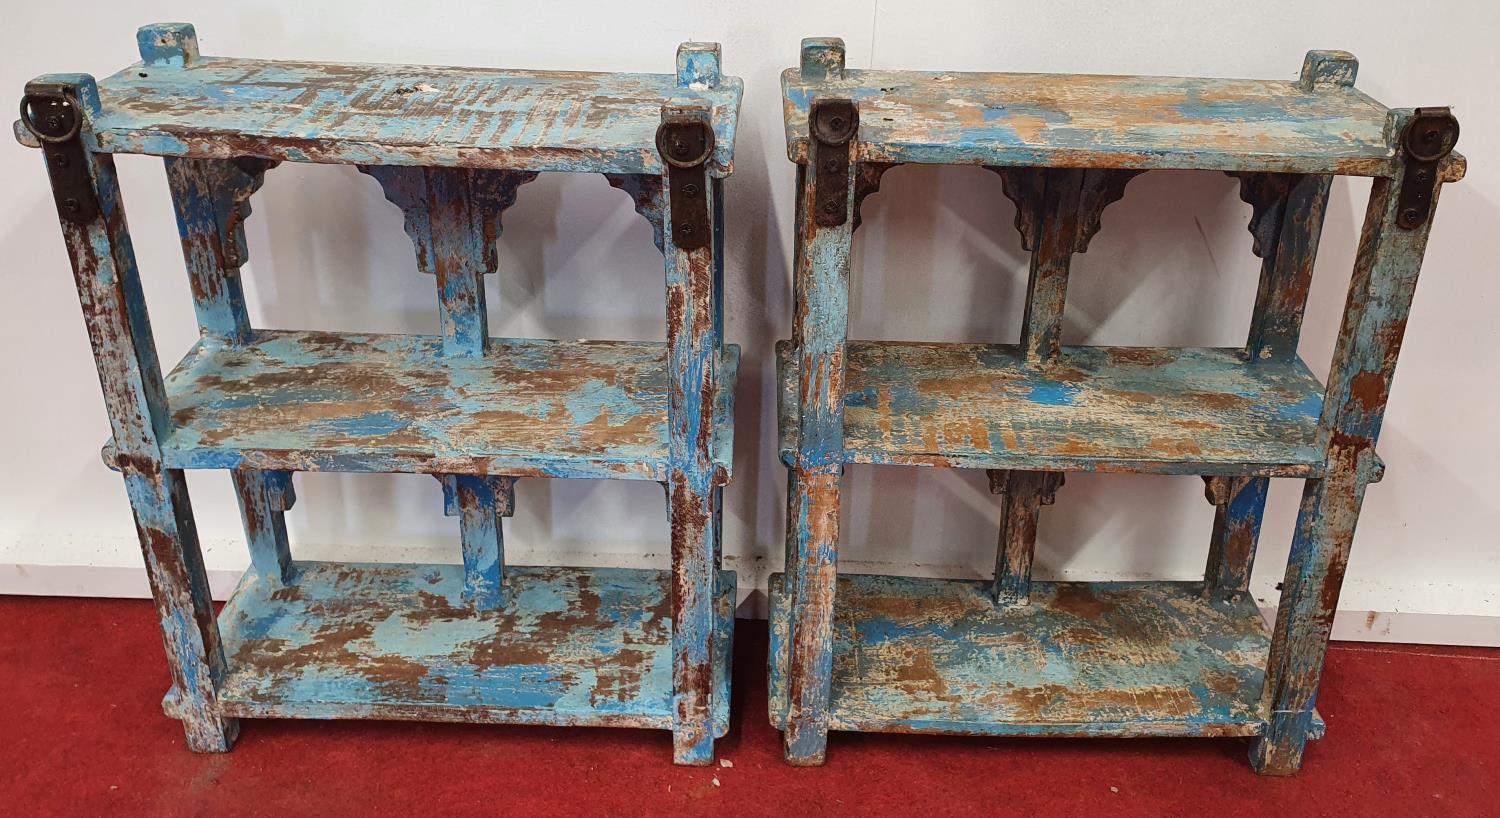 A pair of Painted wall mounted Shelves.41w x 17d x 50h cms.